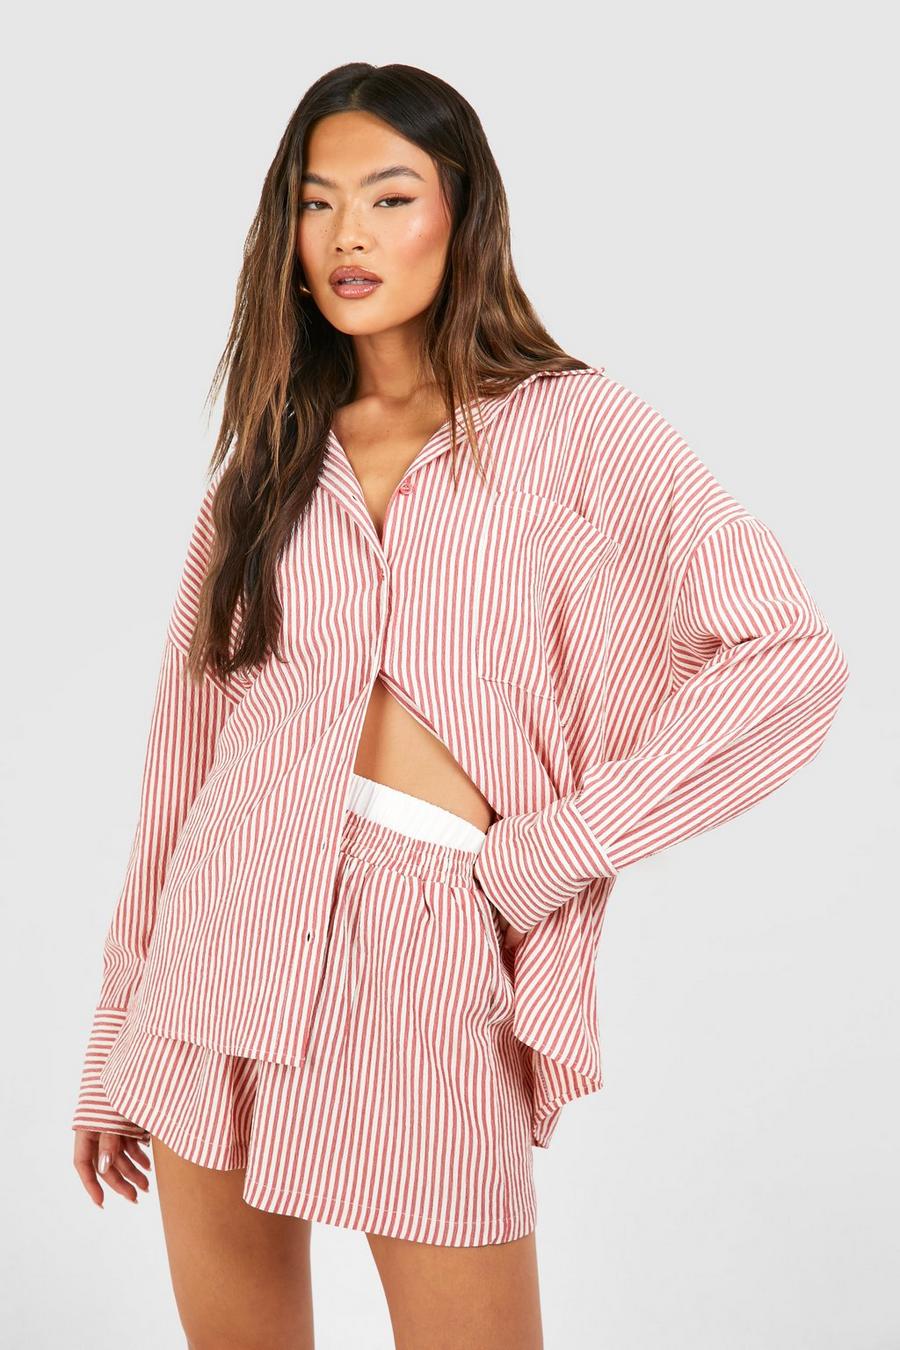 Spice Textured Stripe Relaxed Fit Shirt image number 1